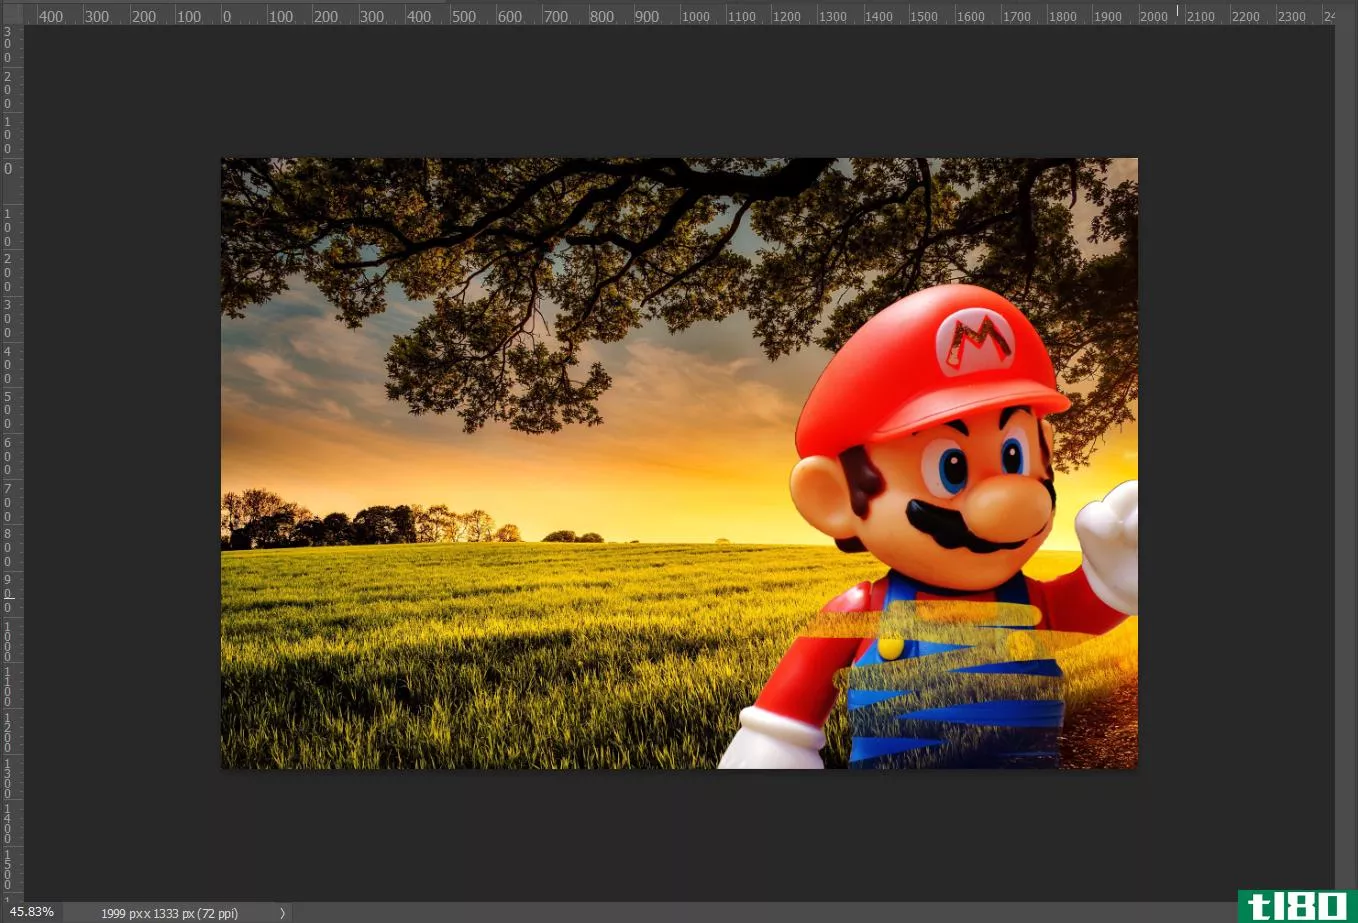 Using a layer mask in Photoshop